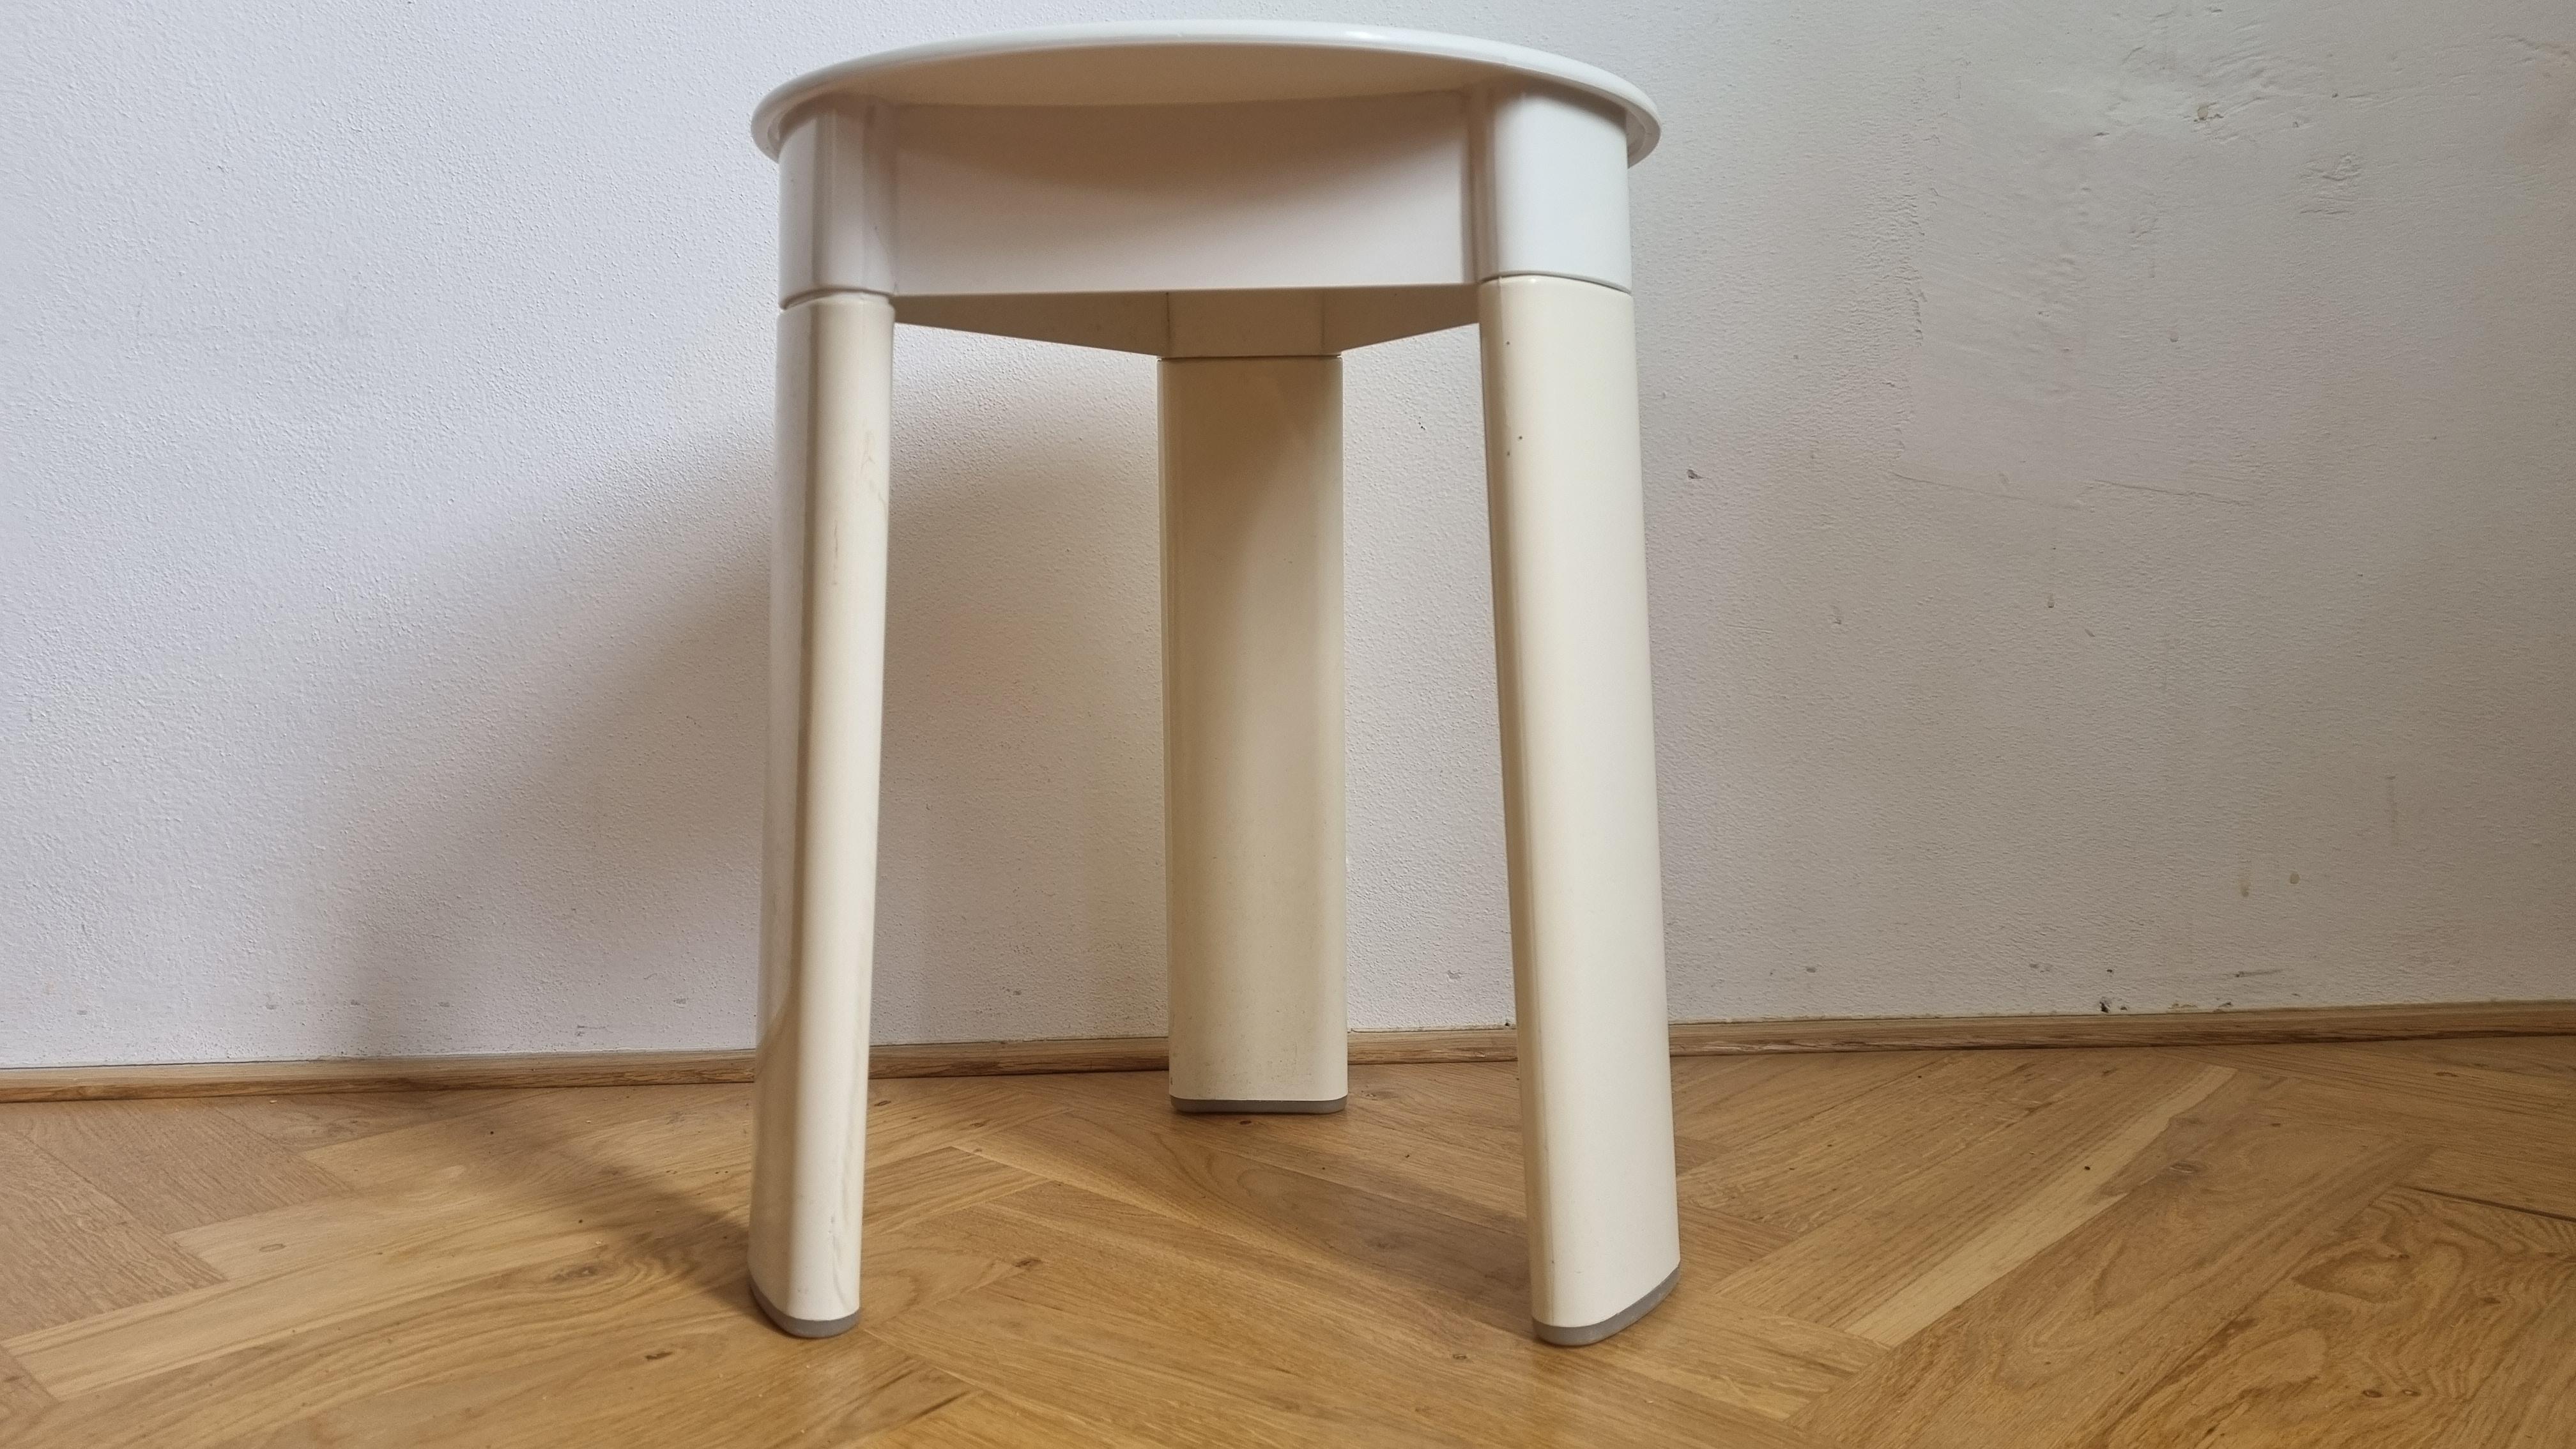 Midcentury Stool or Side Table Trio, Olaf Von Bohr for Gedy, Italy, 1970s For Sale 2